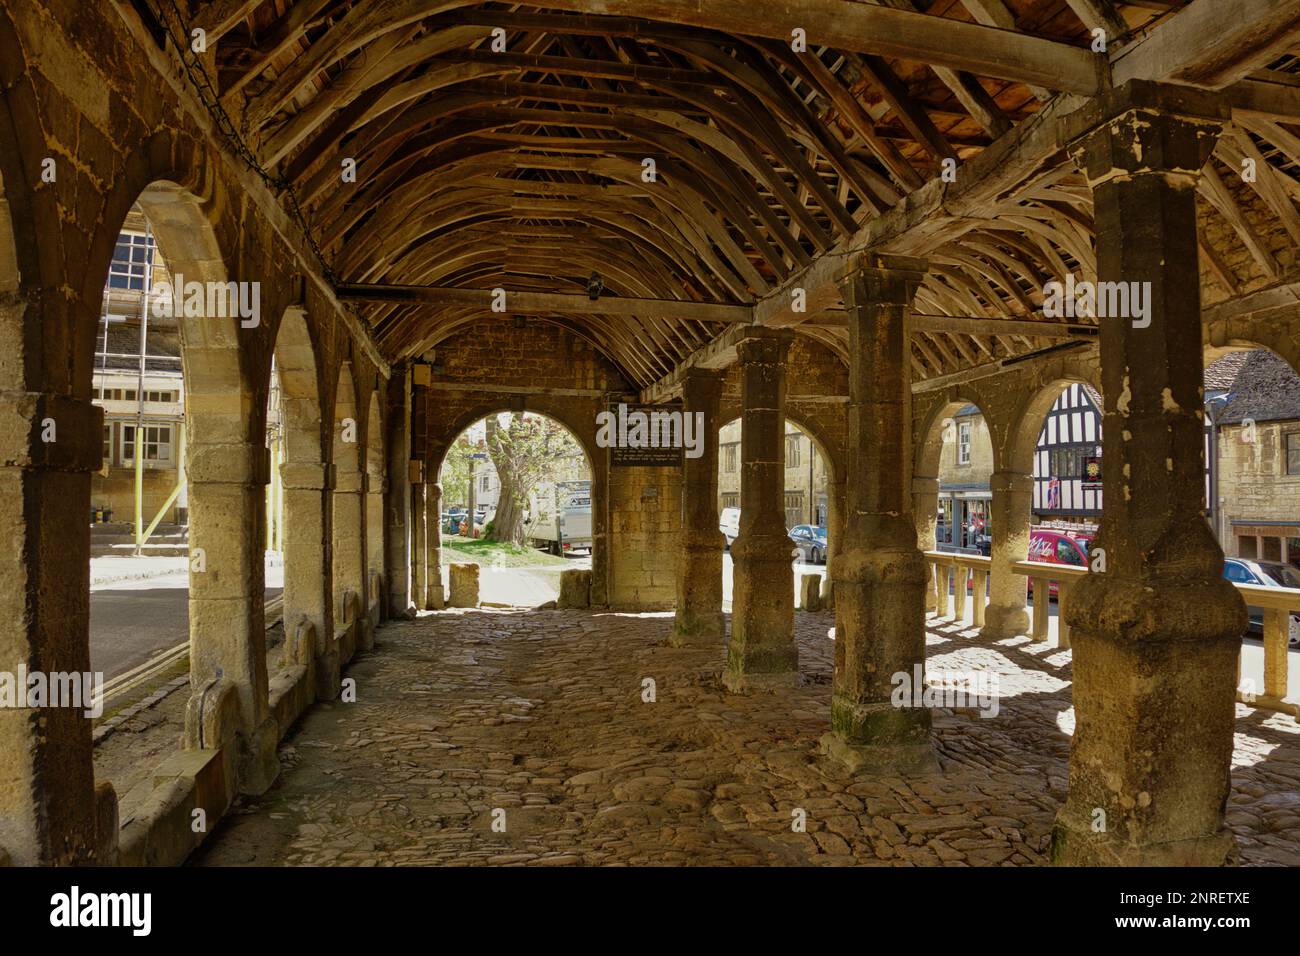 Old Market Hall, Chipping Campden, Gloucestershire, UK Stock Photo